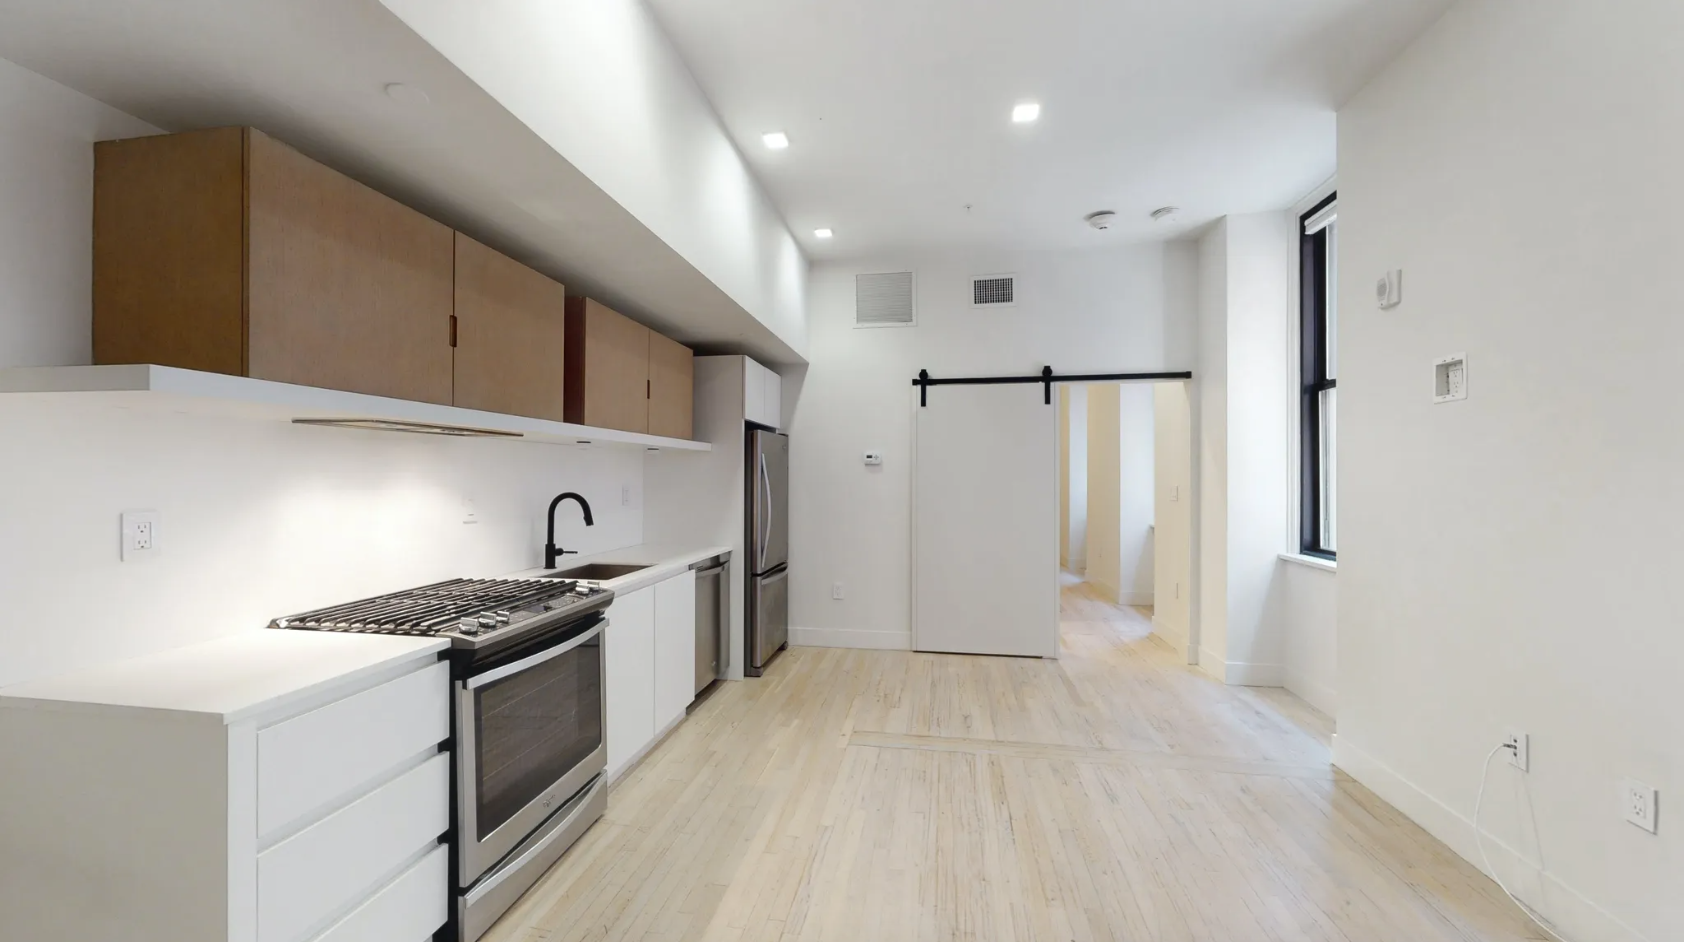 The kitchen has white lower level cabinetry and wooden upper-level cabinetry, hardwood floors, stainless steel appliances, and a barn door into the bedroom.